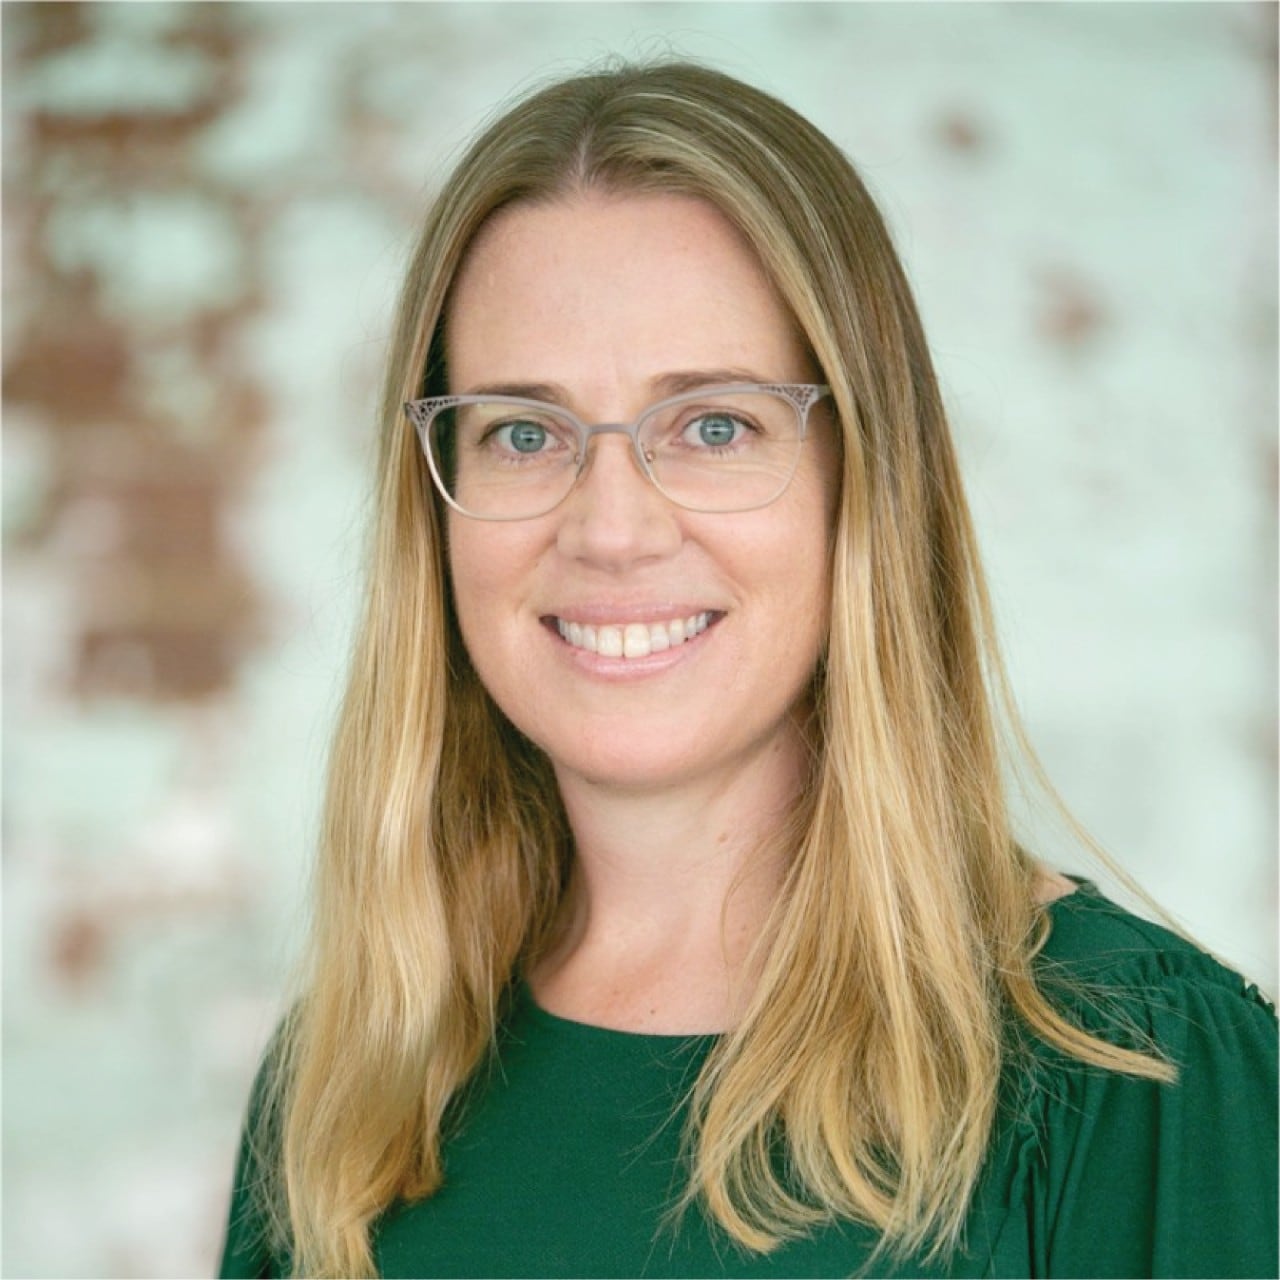 An image of Dr Erin Kelly. She is a blonde woman with shoulder-length hair, and is wearing clear frames and a plain green shirt.